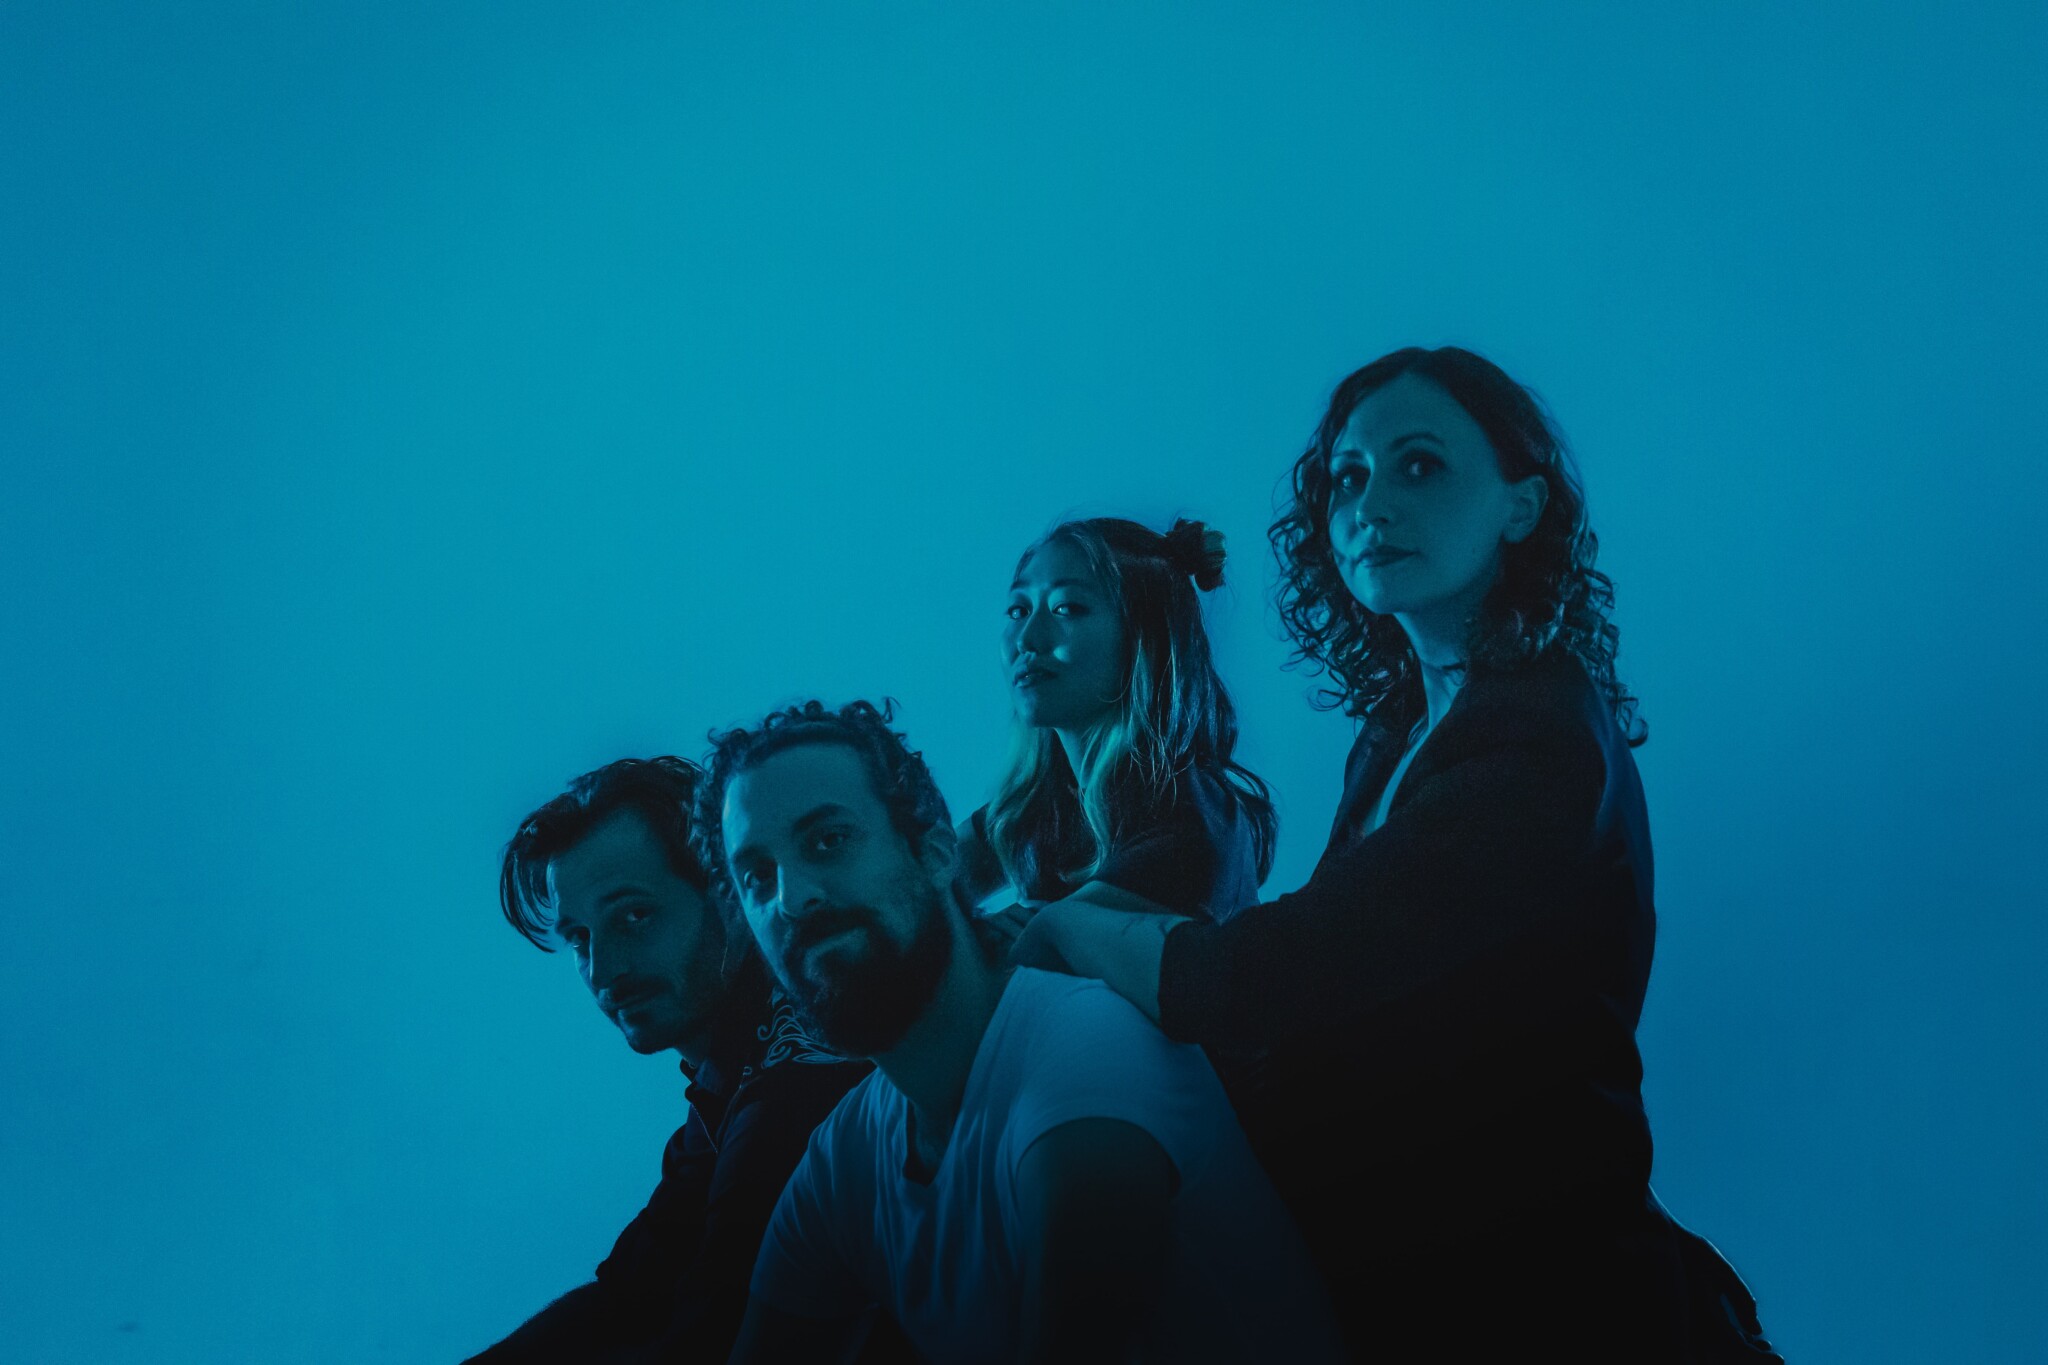 Four people look towards the camera with their bodies facing to the left under blue lighting.